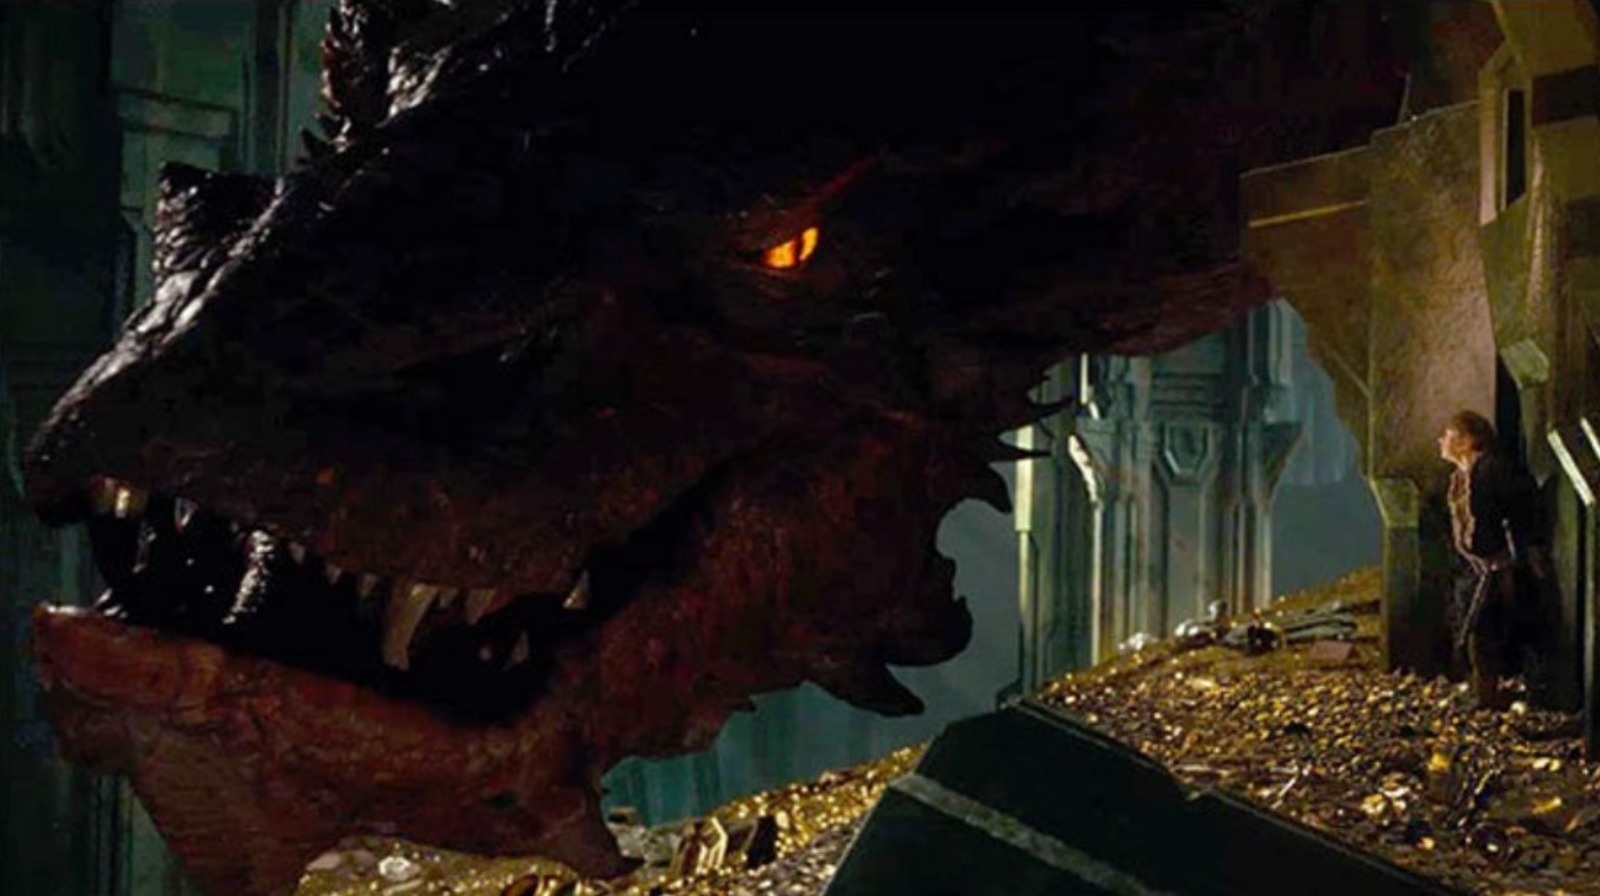 The Nerd of the Rings on X: Smaug and Glaurung were based on real dragons  Tolkien encountered when he gained access to a secret civilization of  dwarves who domesticated the creatures. Here